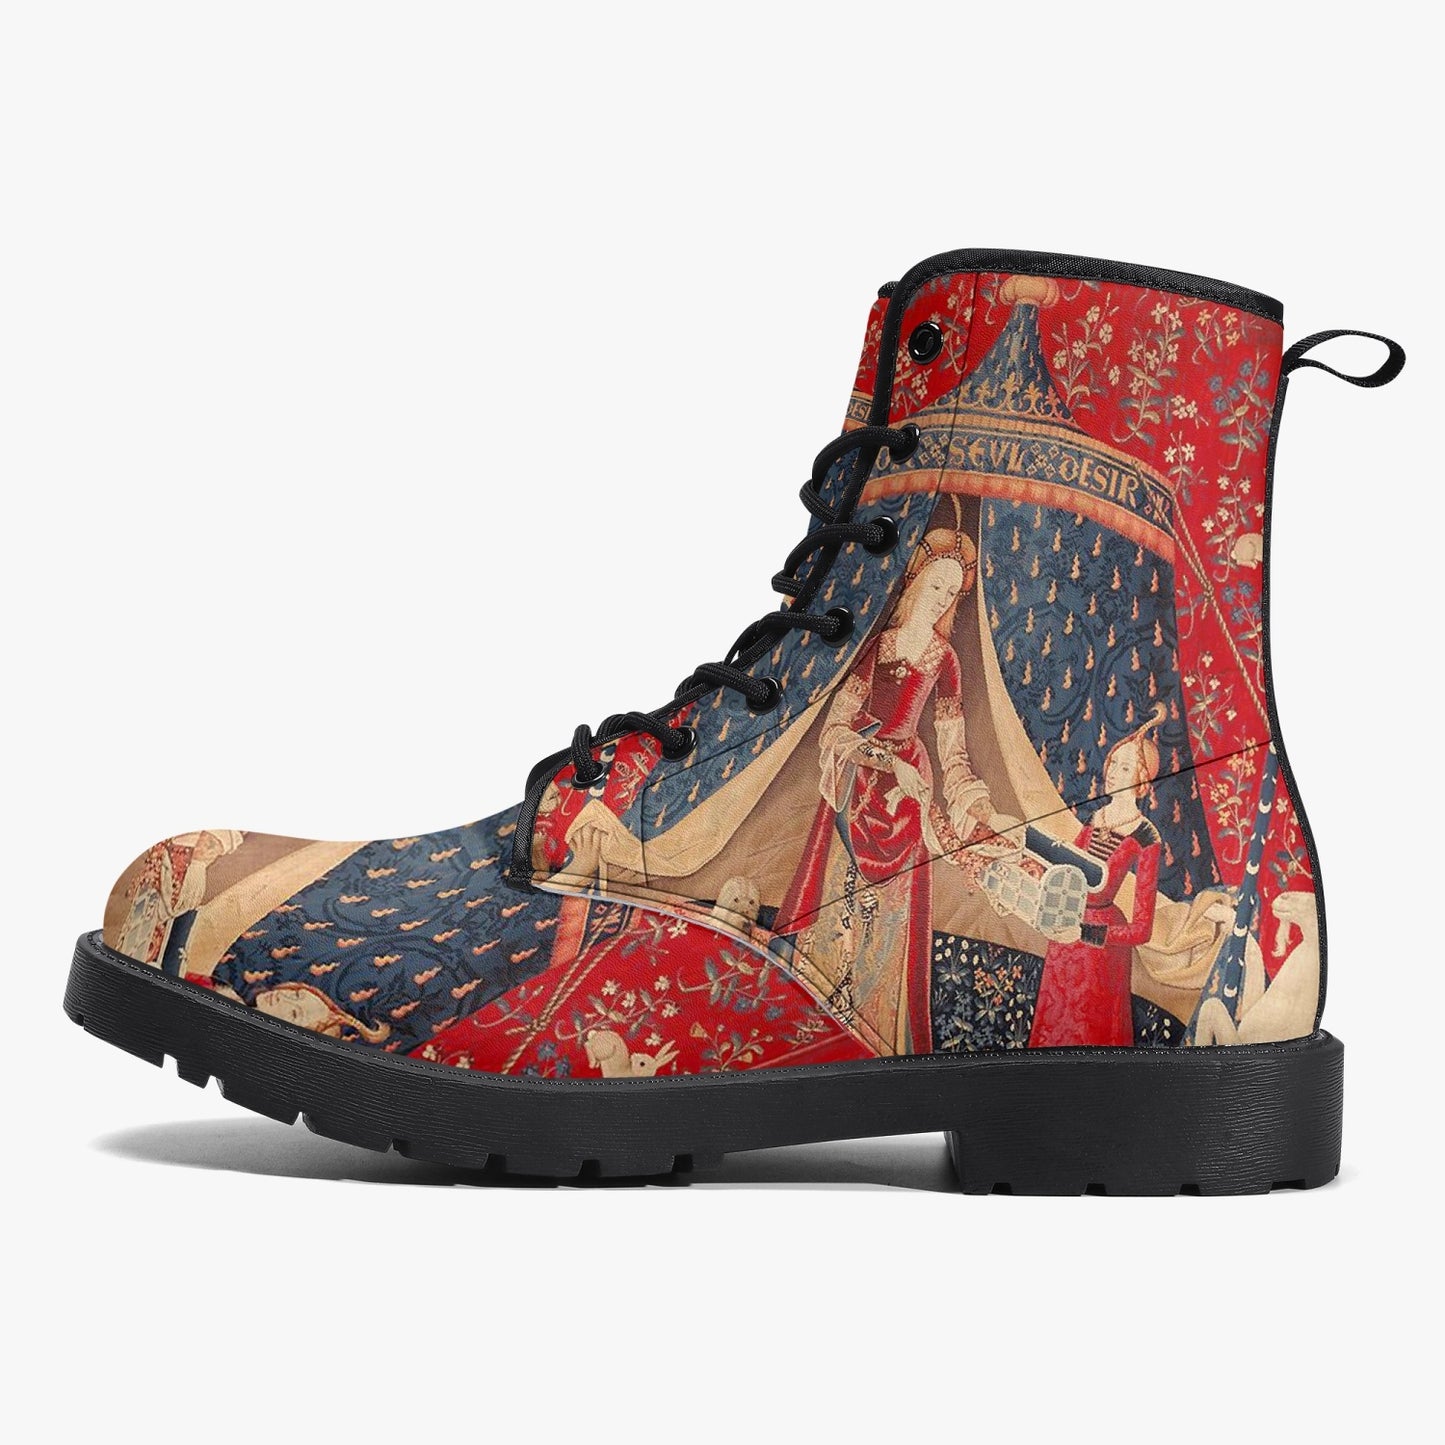 The Lady and the Unicorn Vegan leather Combat Boots - Mon Seul Desir Tapestry Boots for Art Lover (JPREG75)